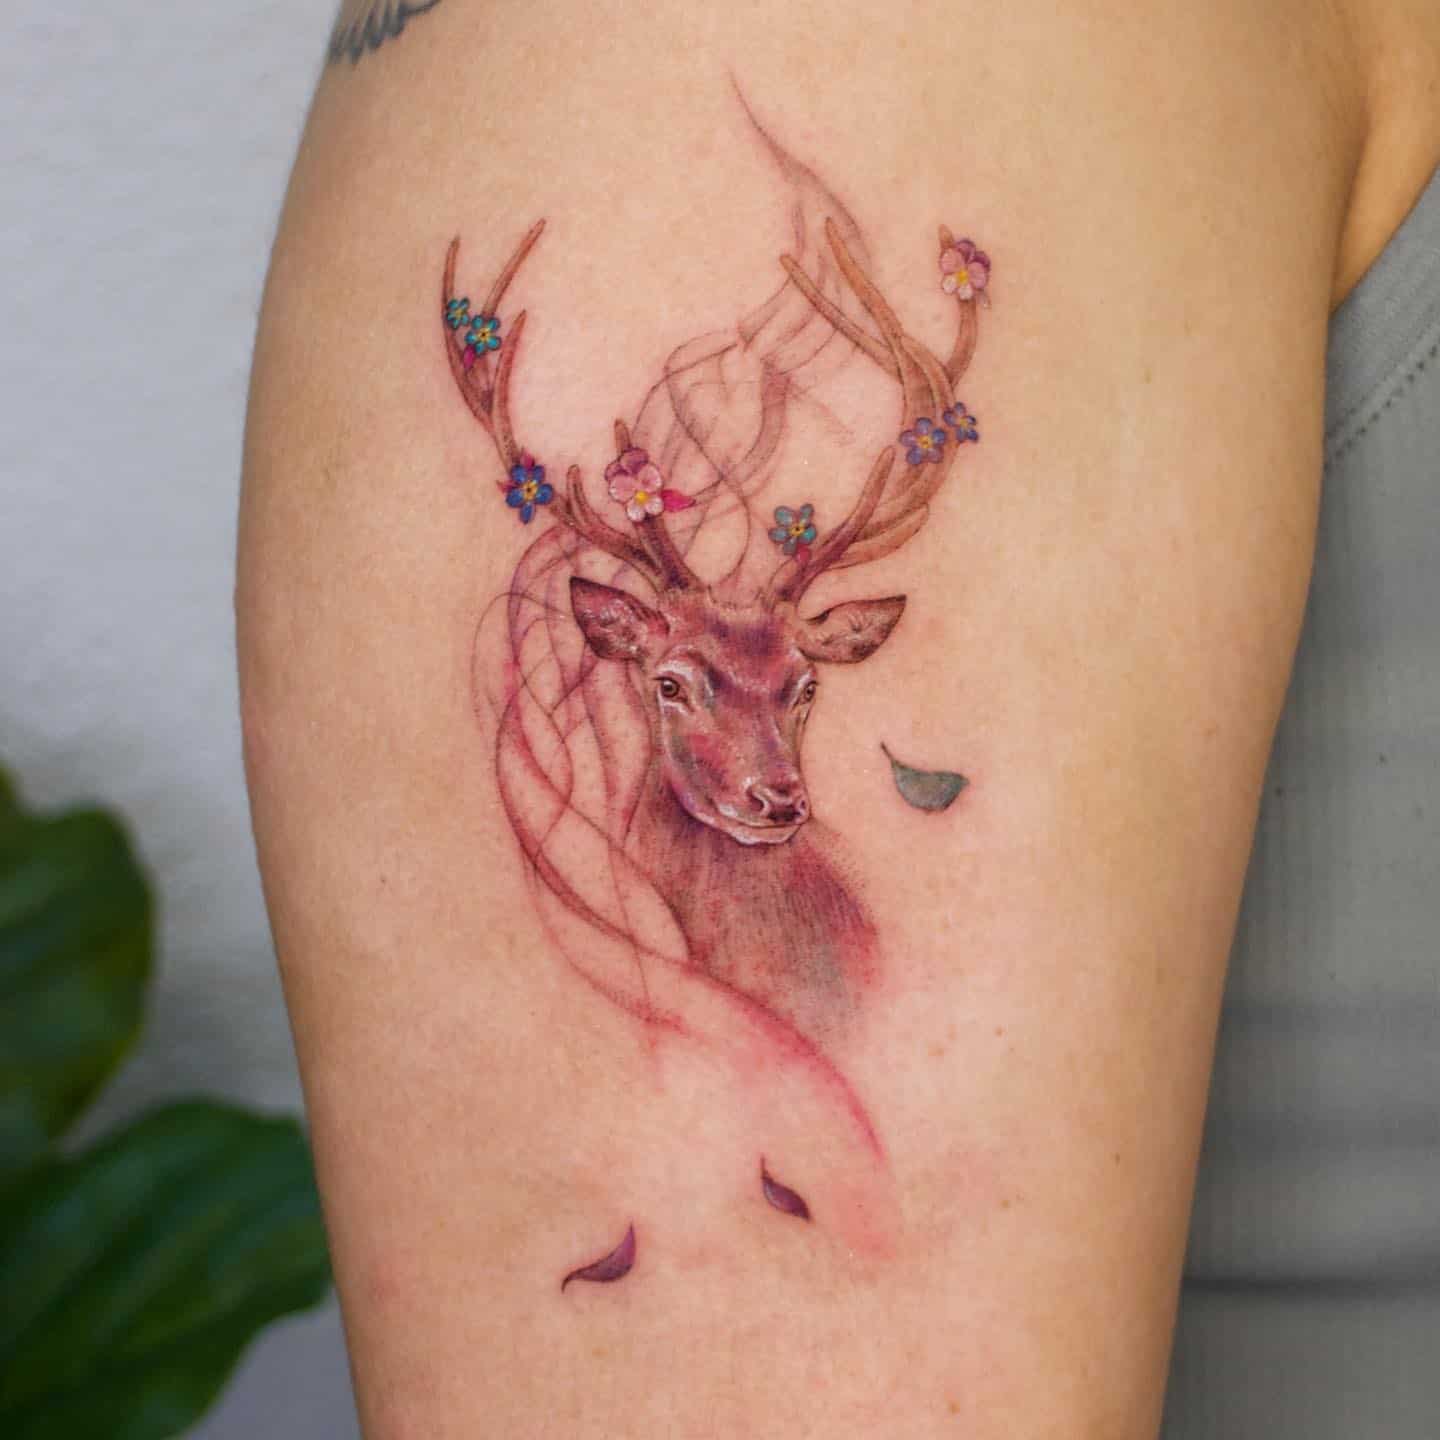 Lace deer tattoo on the left thigh.